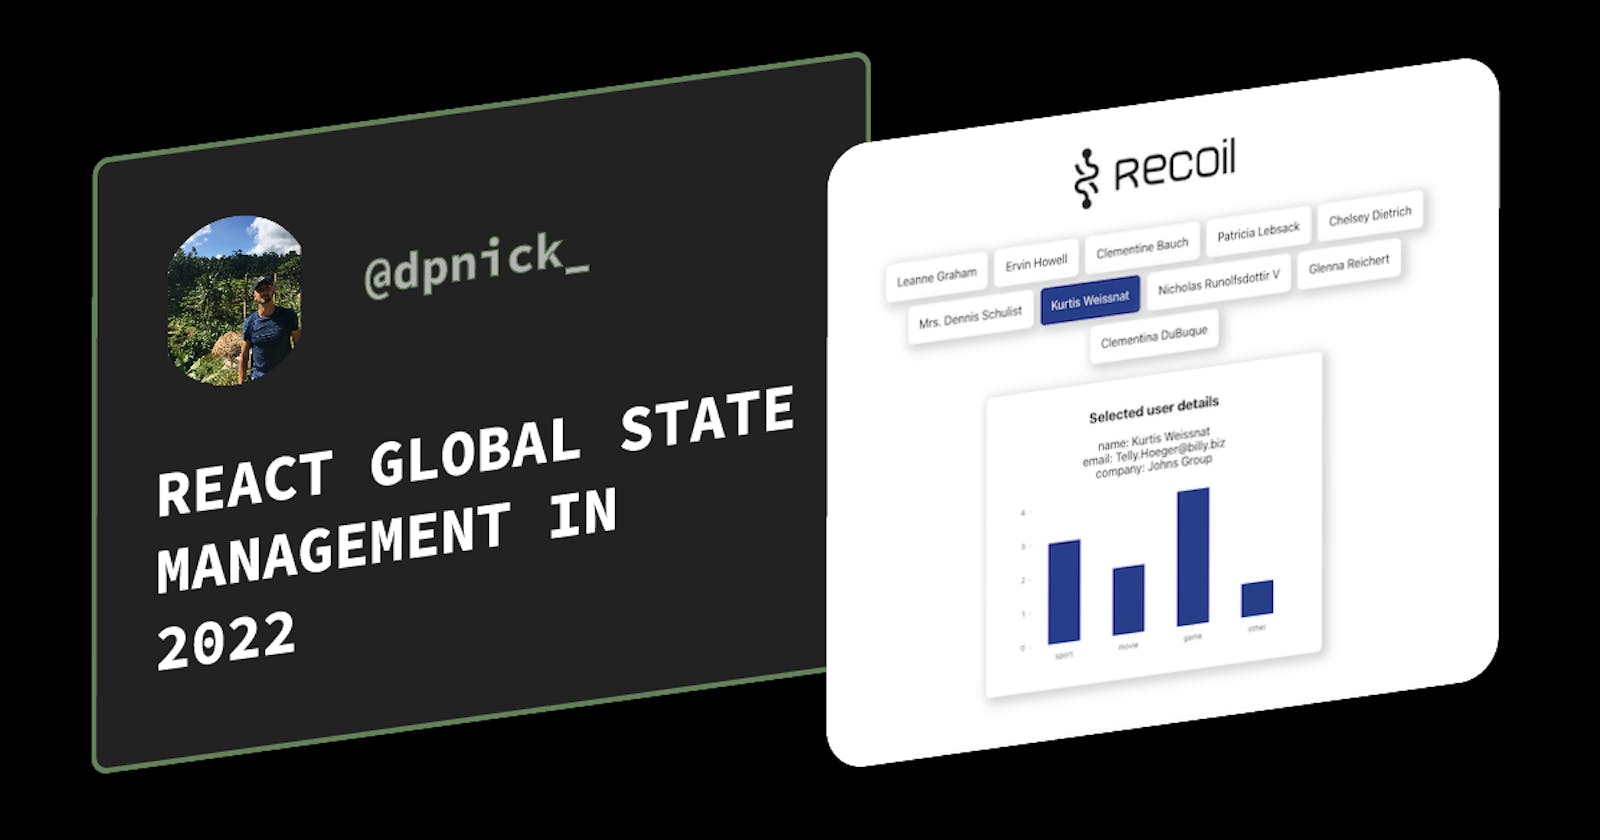 React global state management in 2022